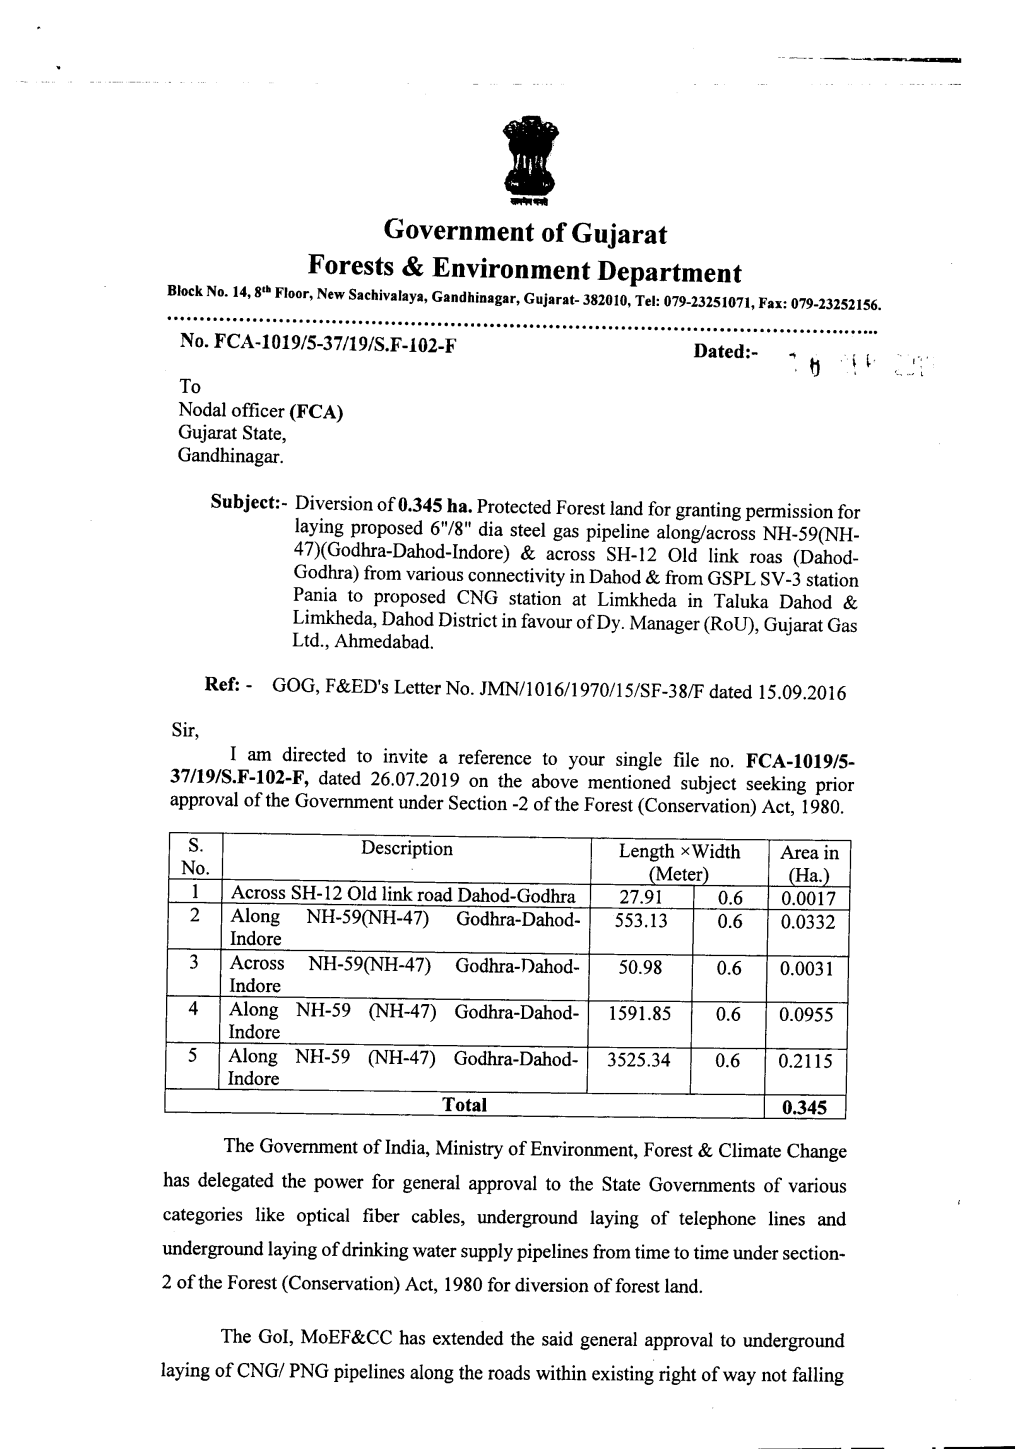 Government of Gujarat Forests & Environment Department